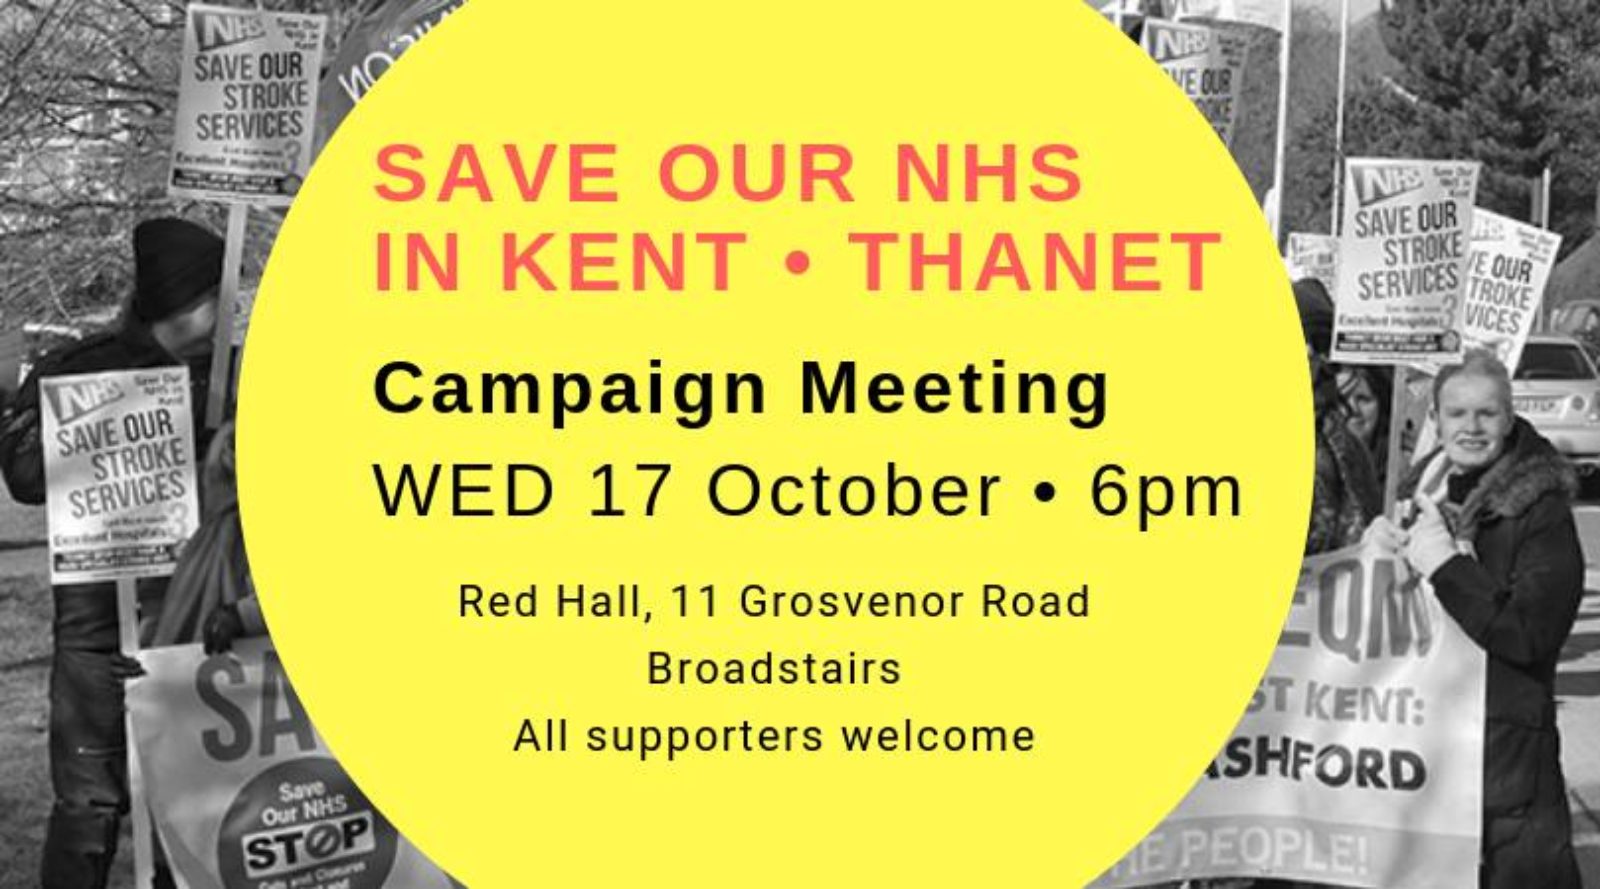 Save Our NHS in Kent Campaign Meeting 17th October at 6pm